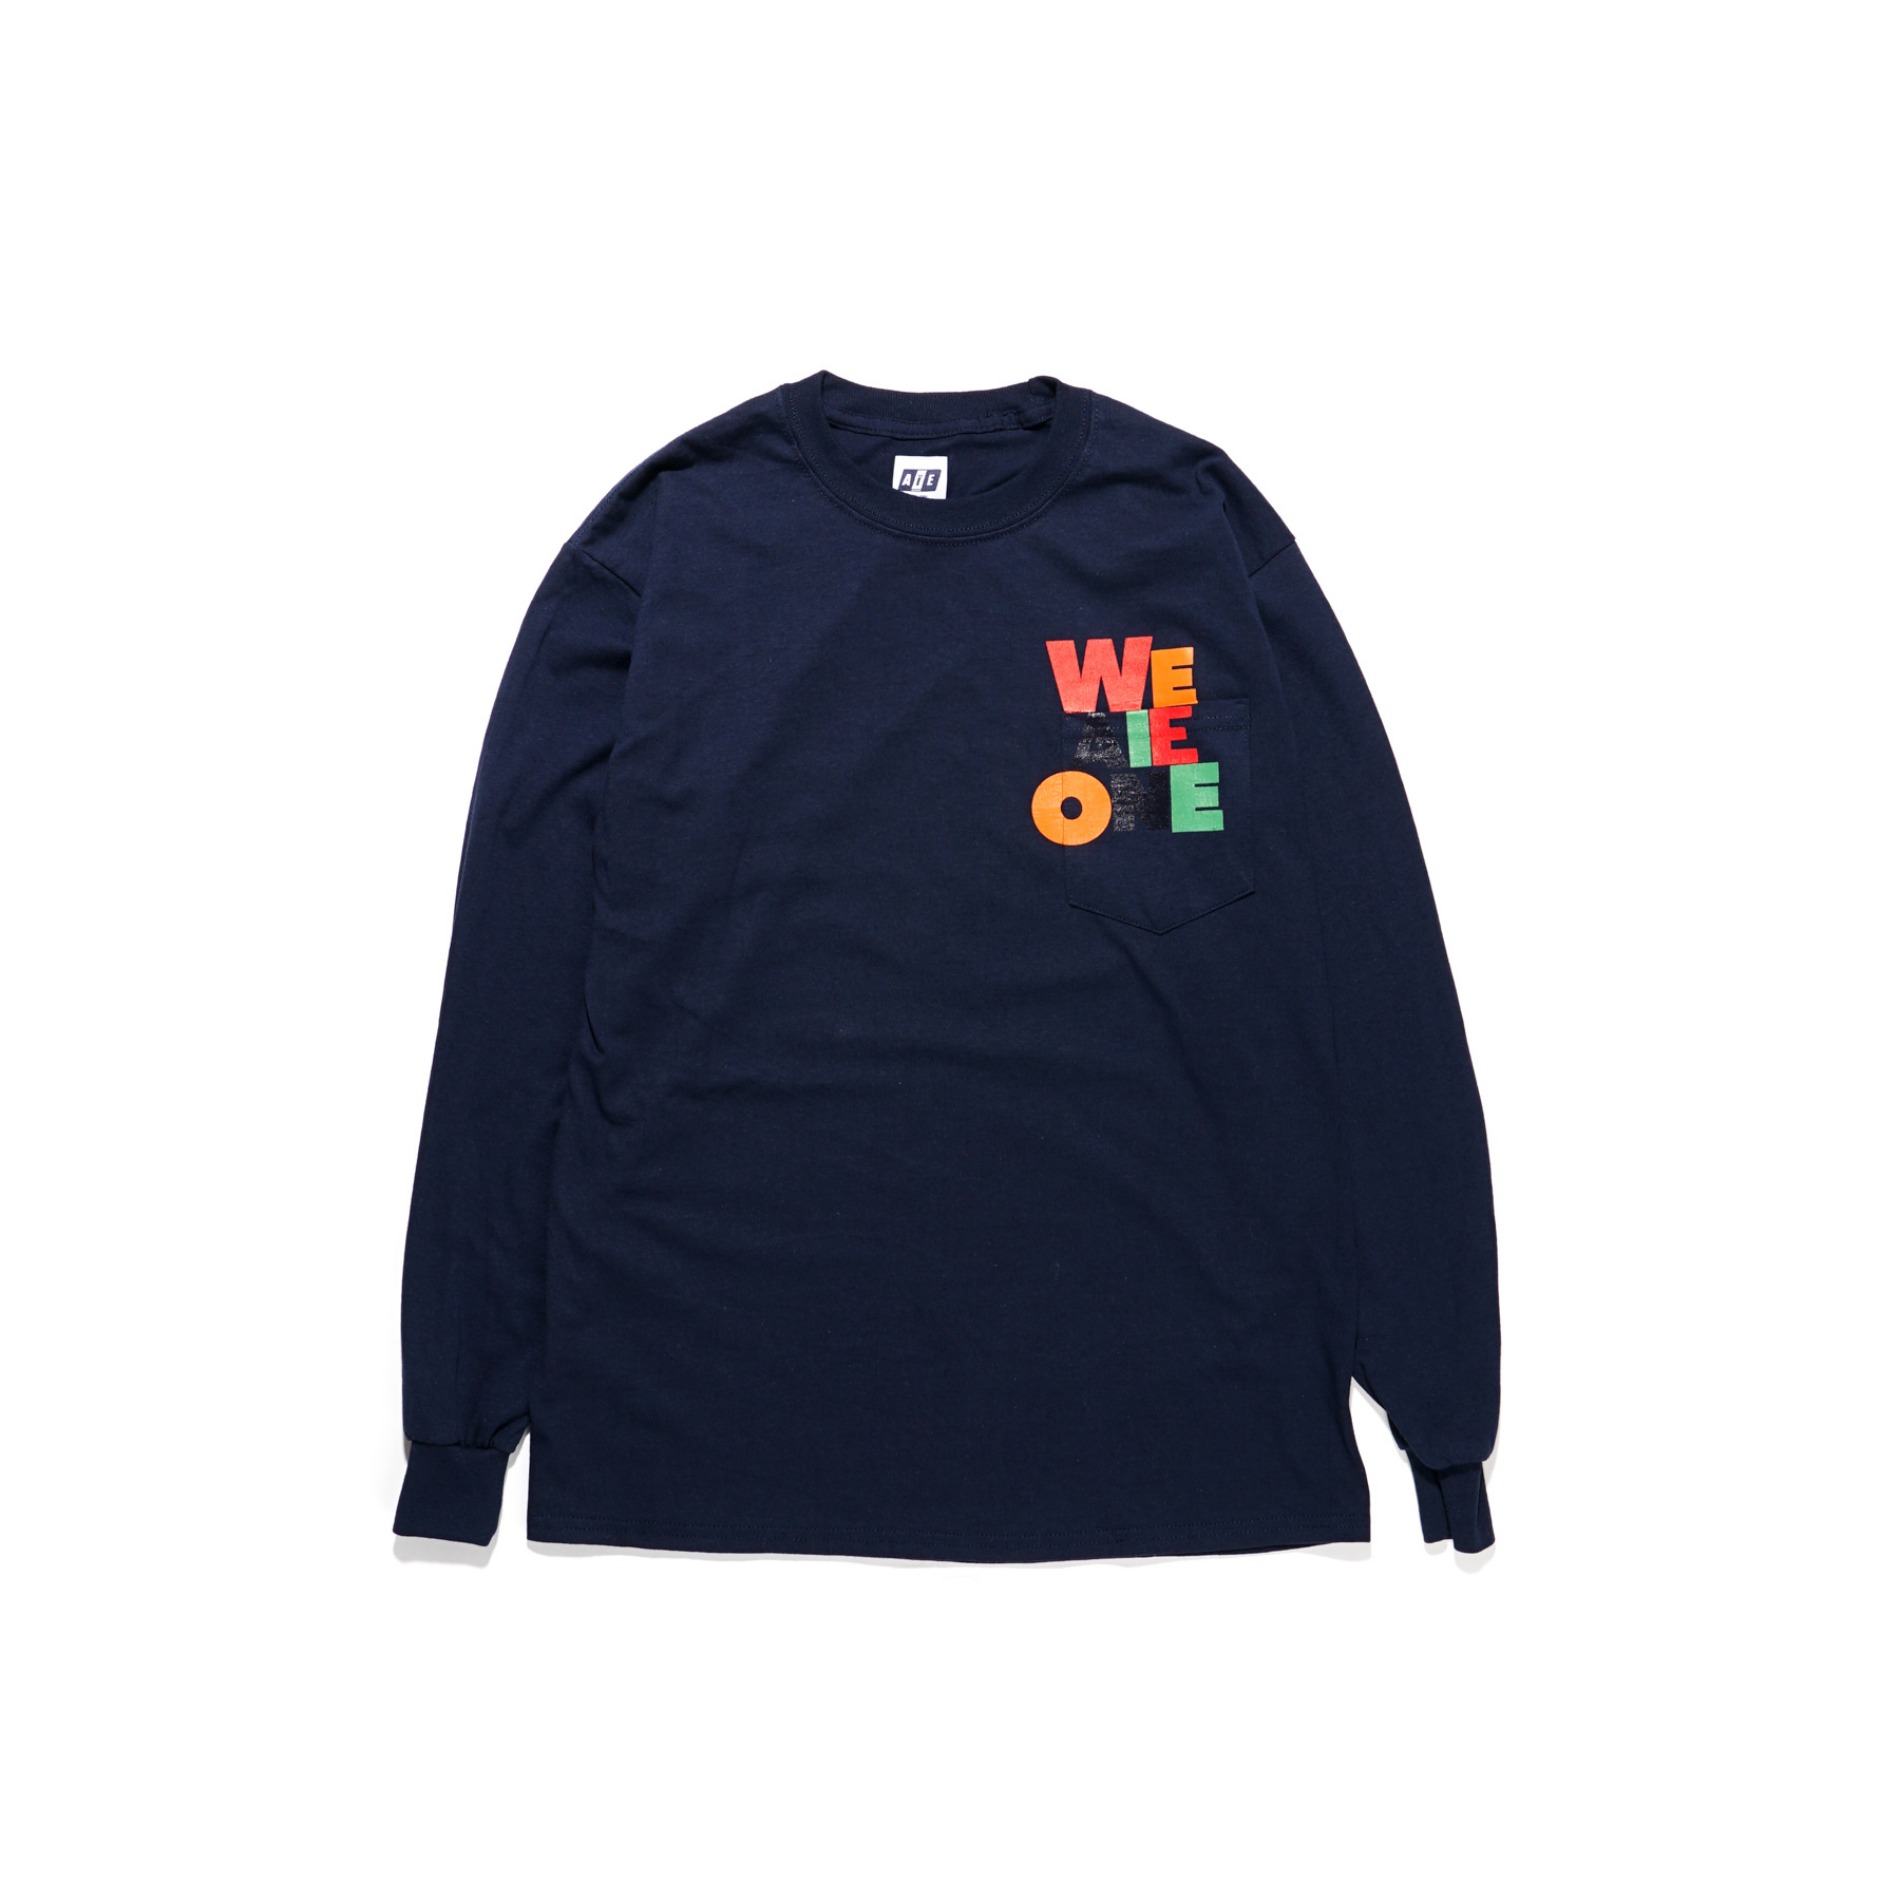 SS22 AIE / PRINTED WE AIE ONE L/S POCKET TEE NAVY